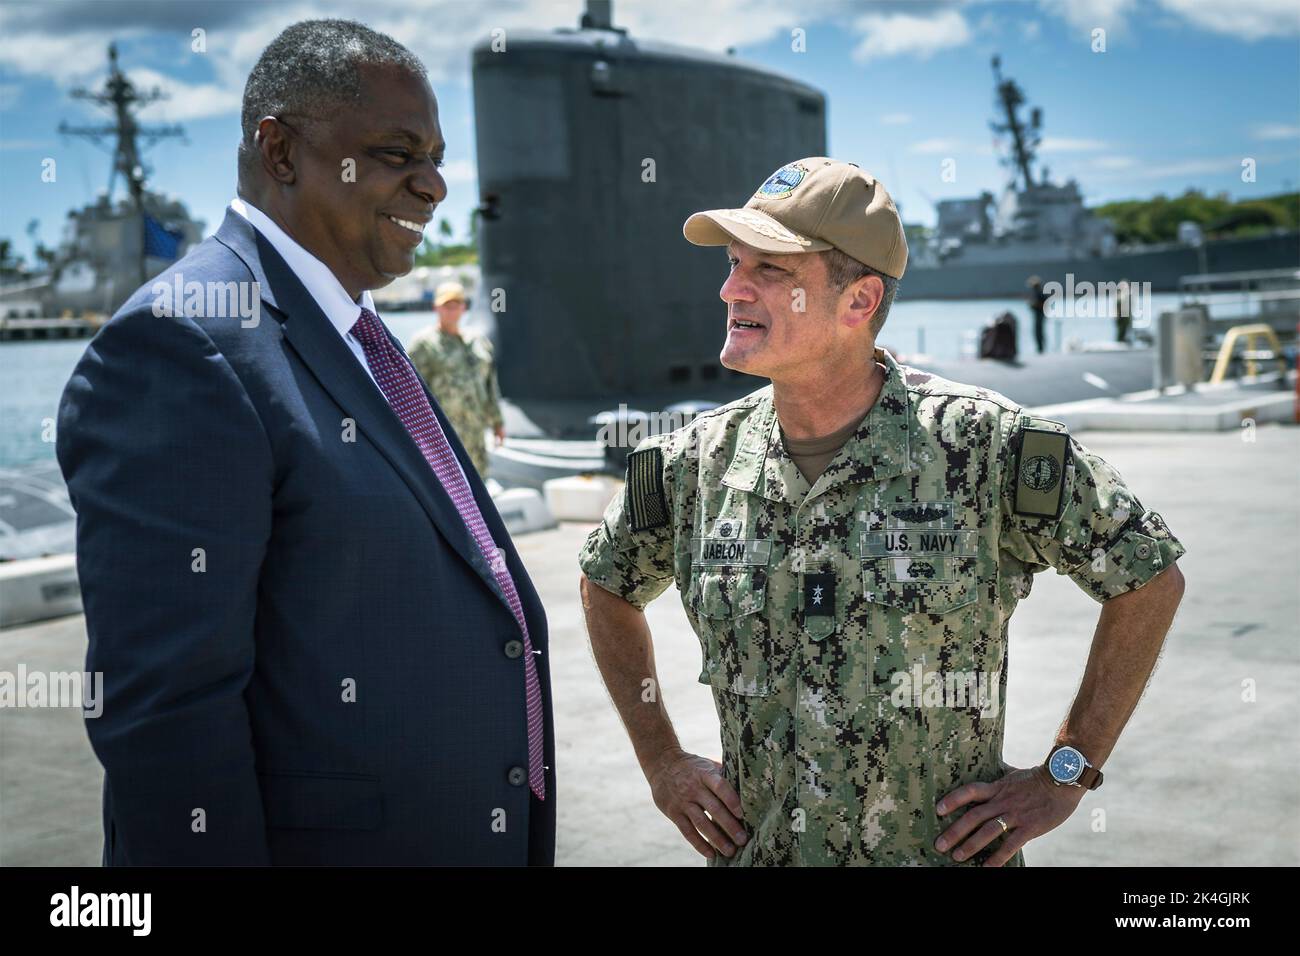 Aiea, United States Of America. 01st Oct, 2022. Aiea, United States of America. 01 October, 2022. U.S. Navy Rear Adm. Jeffery Jablon, Commander, Submarine Force, Pacific Fleet chats with Secretary of Defense Lloyd Austin, left, before a tour of the Virginia-class submarine USS Mississippi with Australian Defense Minister Richard Marles at Naval Station Pearl Harbor, October 1, 2022 in Honolulu, Oahu, Hawaii. Credit: Chad J. McNeeley/DOD/Alamy Live News Stock Photo